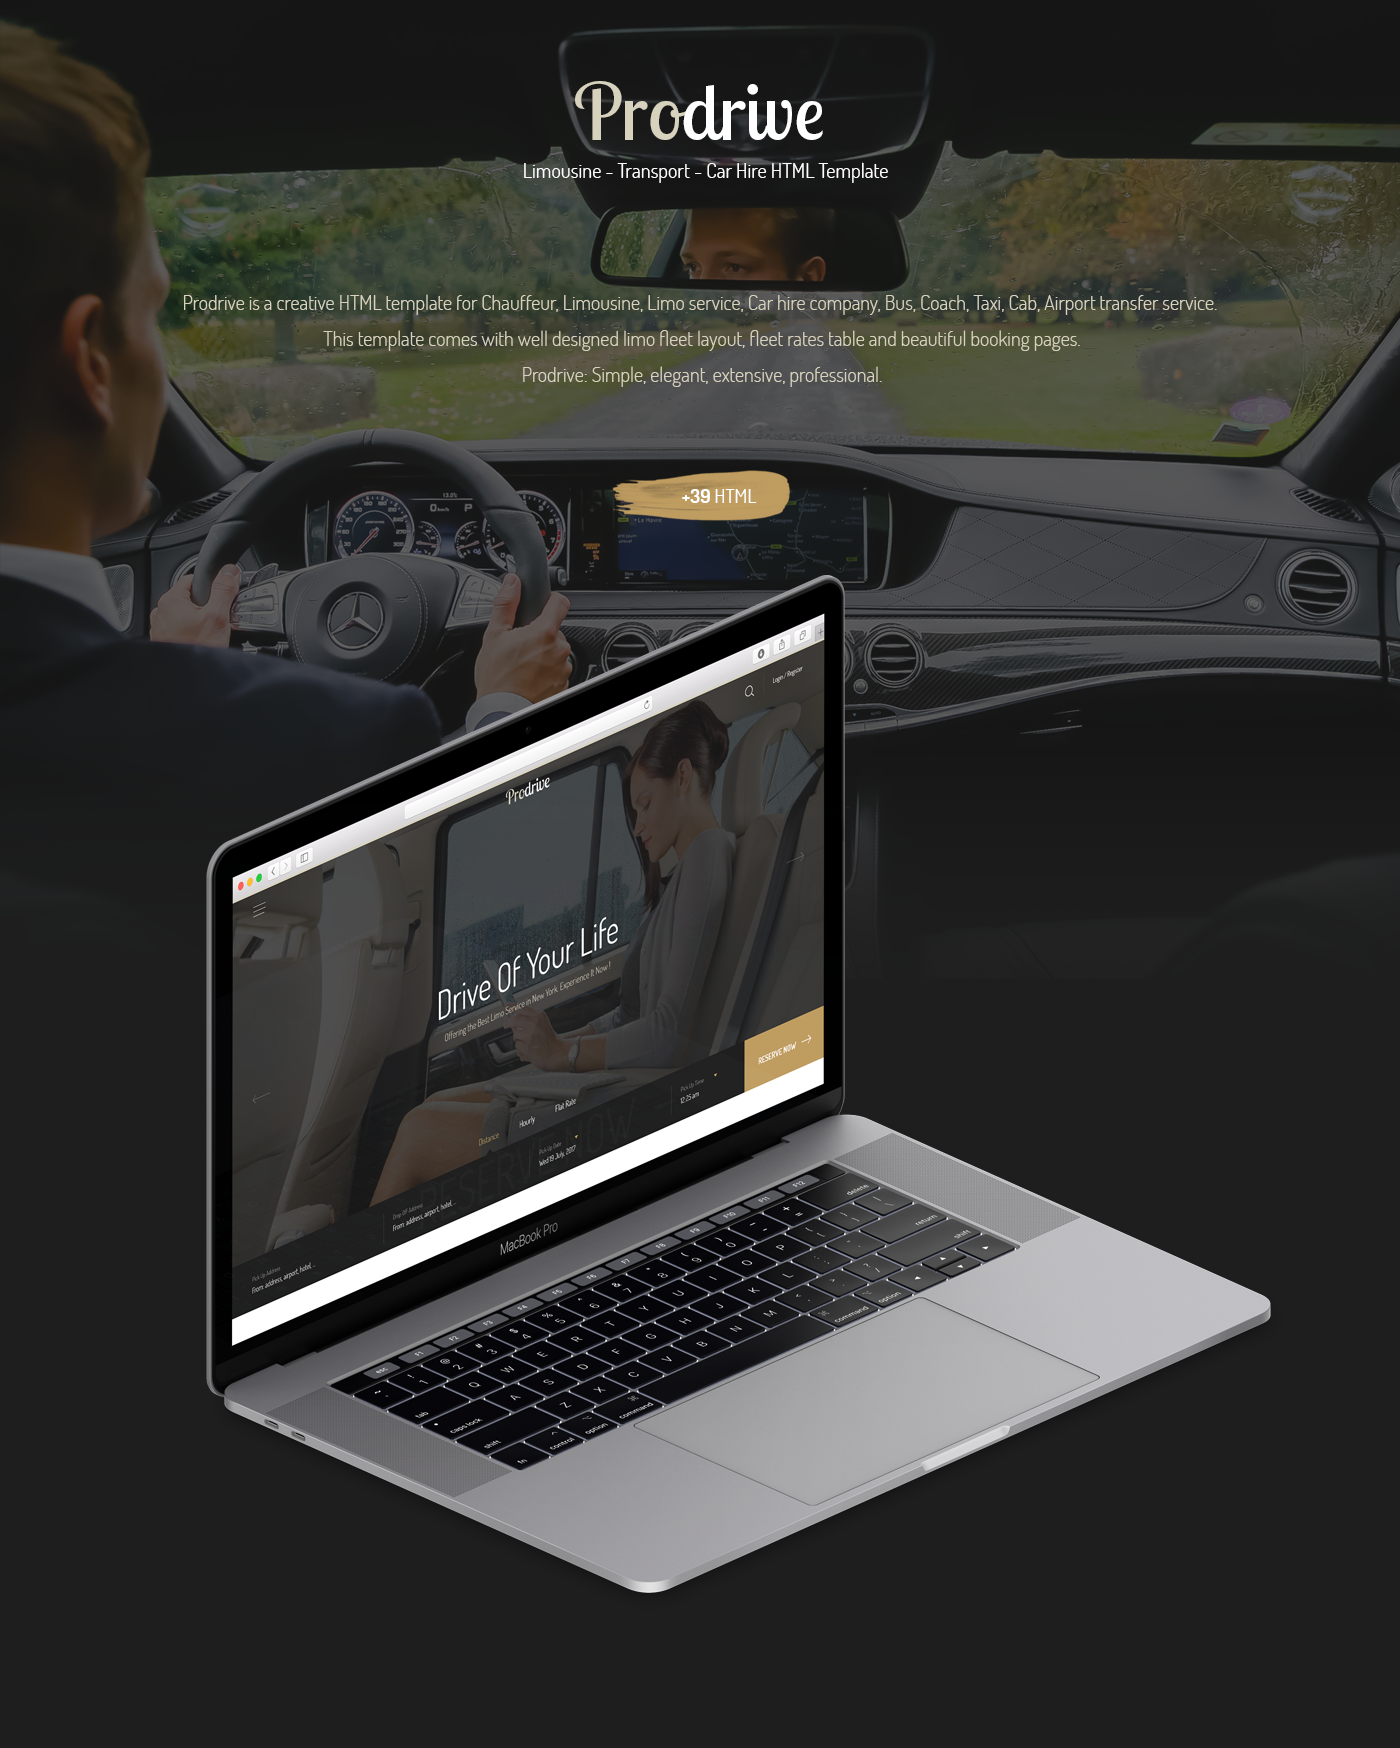 Prodrive - Chauffeur, Limousine, Transport and Car Hire HTML Template - 1